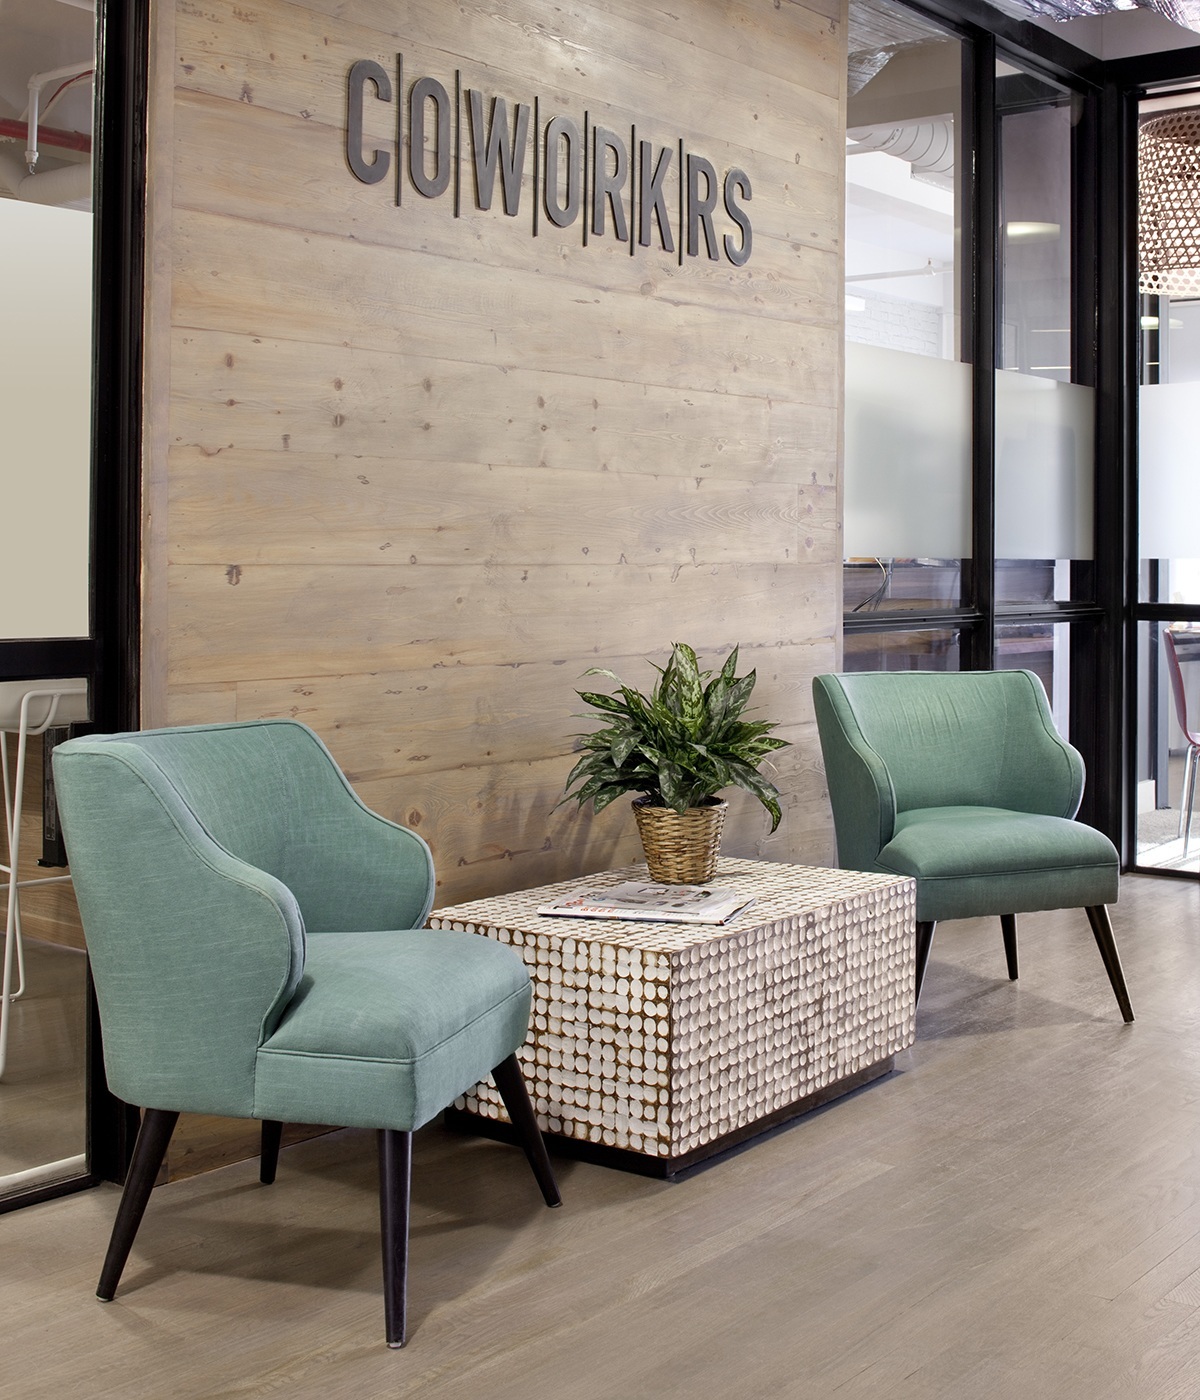 Inside Cowork|rs’ New York City Coworking Space - Officelovin'